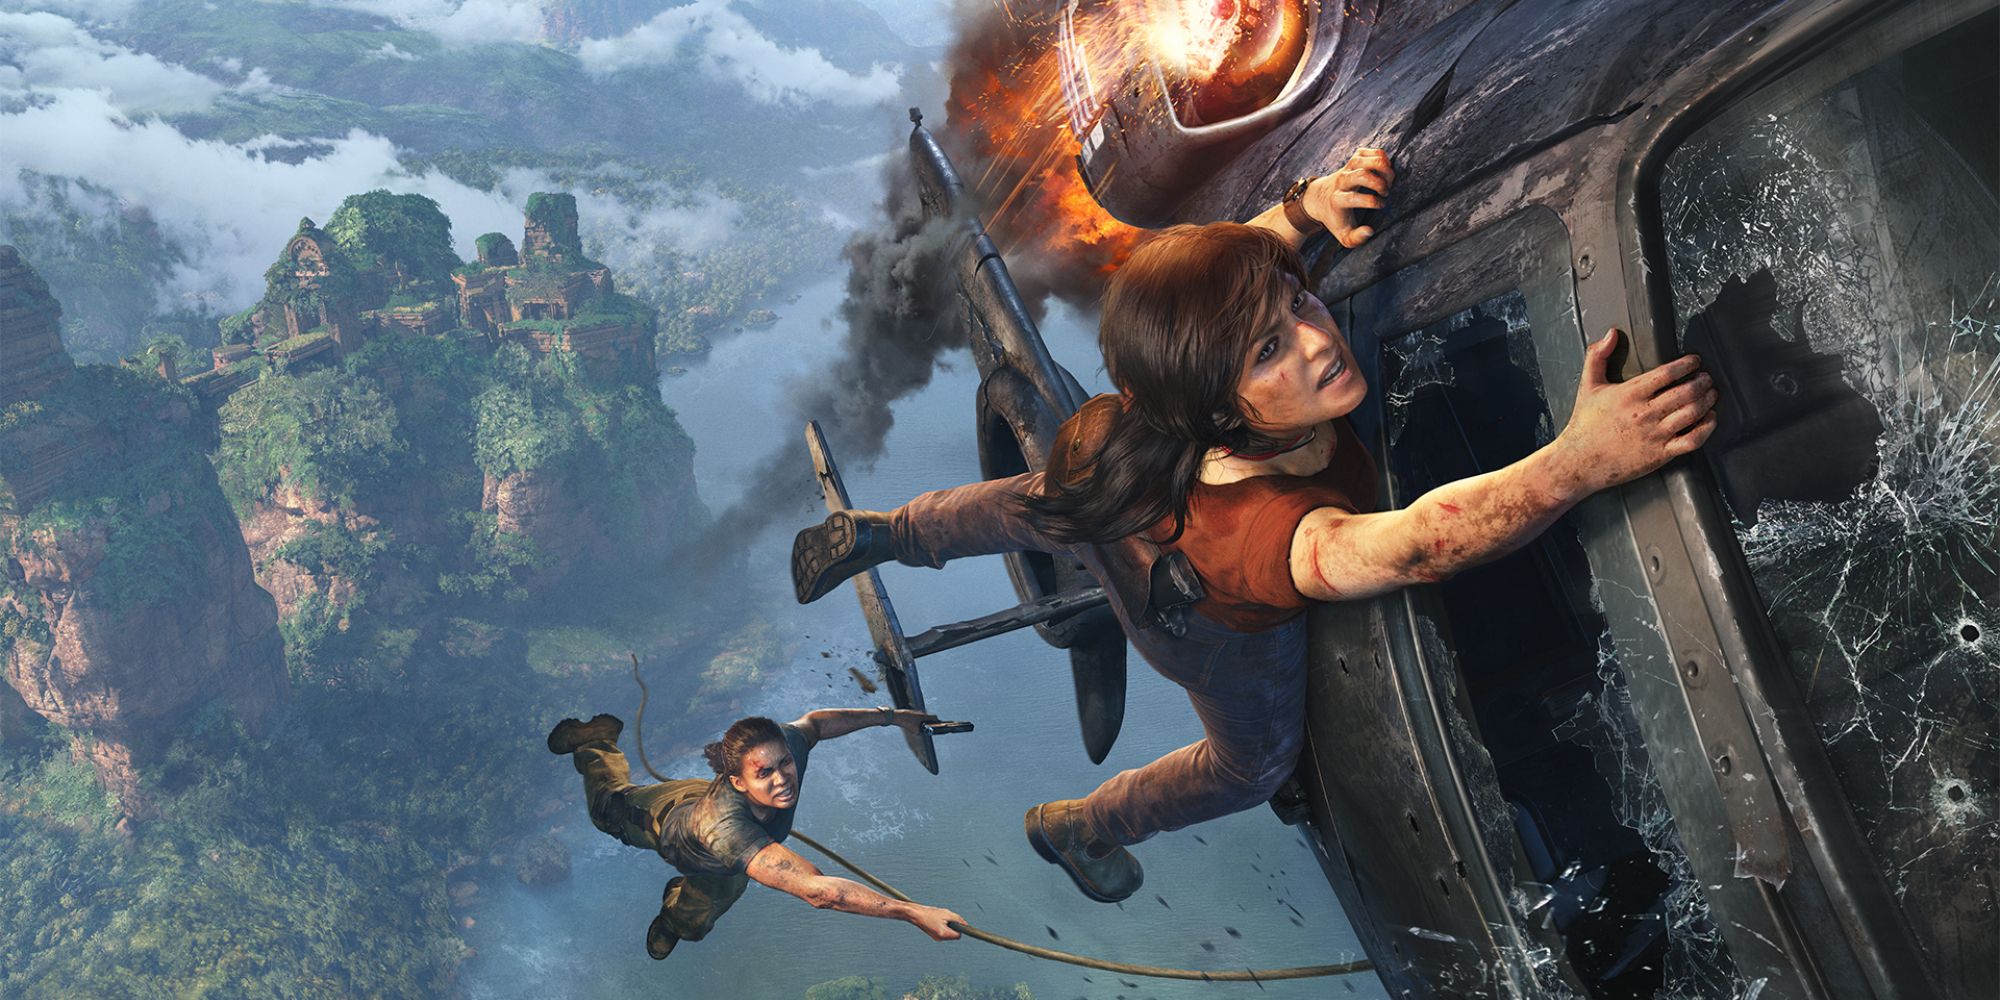 Games With Short Development Times a wide shot of Nadine Ross and Chloe Frazer from Uncharted: The Lost Legacy hanging off of a broken helicopter high in the sky